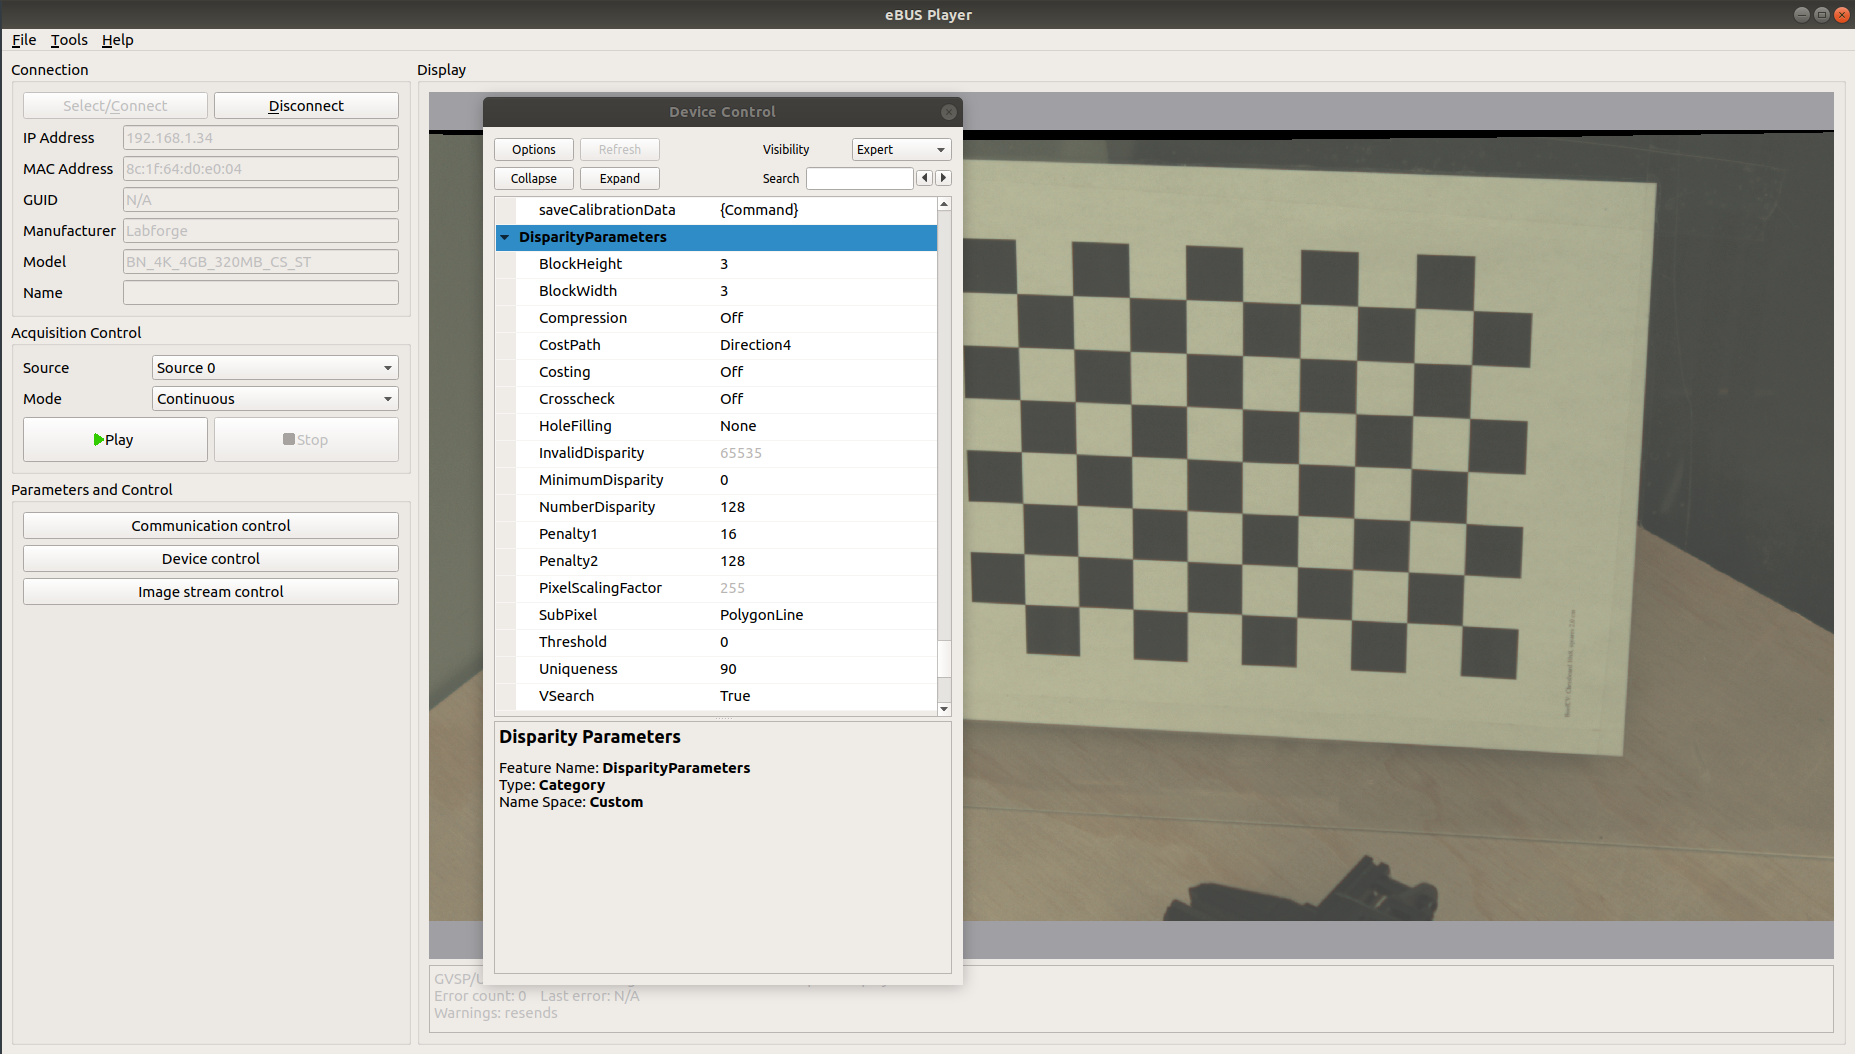 A screenshot of eBus Player connected to a Bottlenose camera showing the Disparity Parameters.